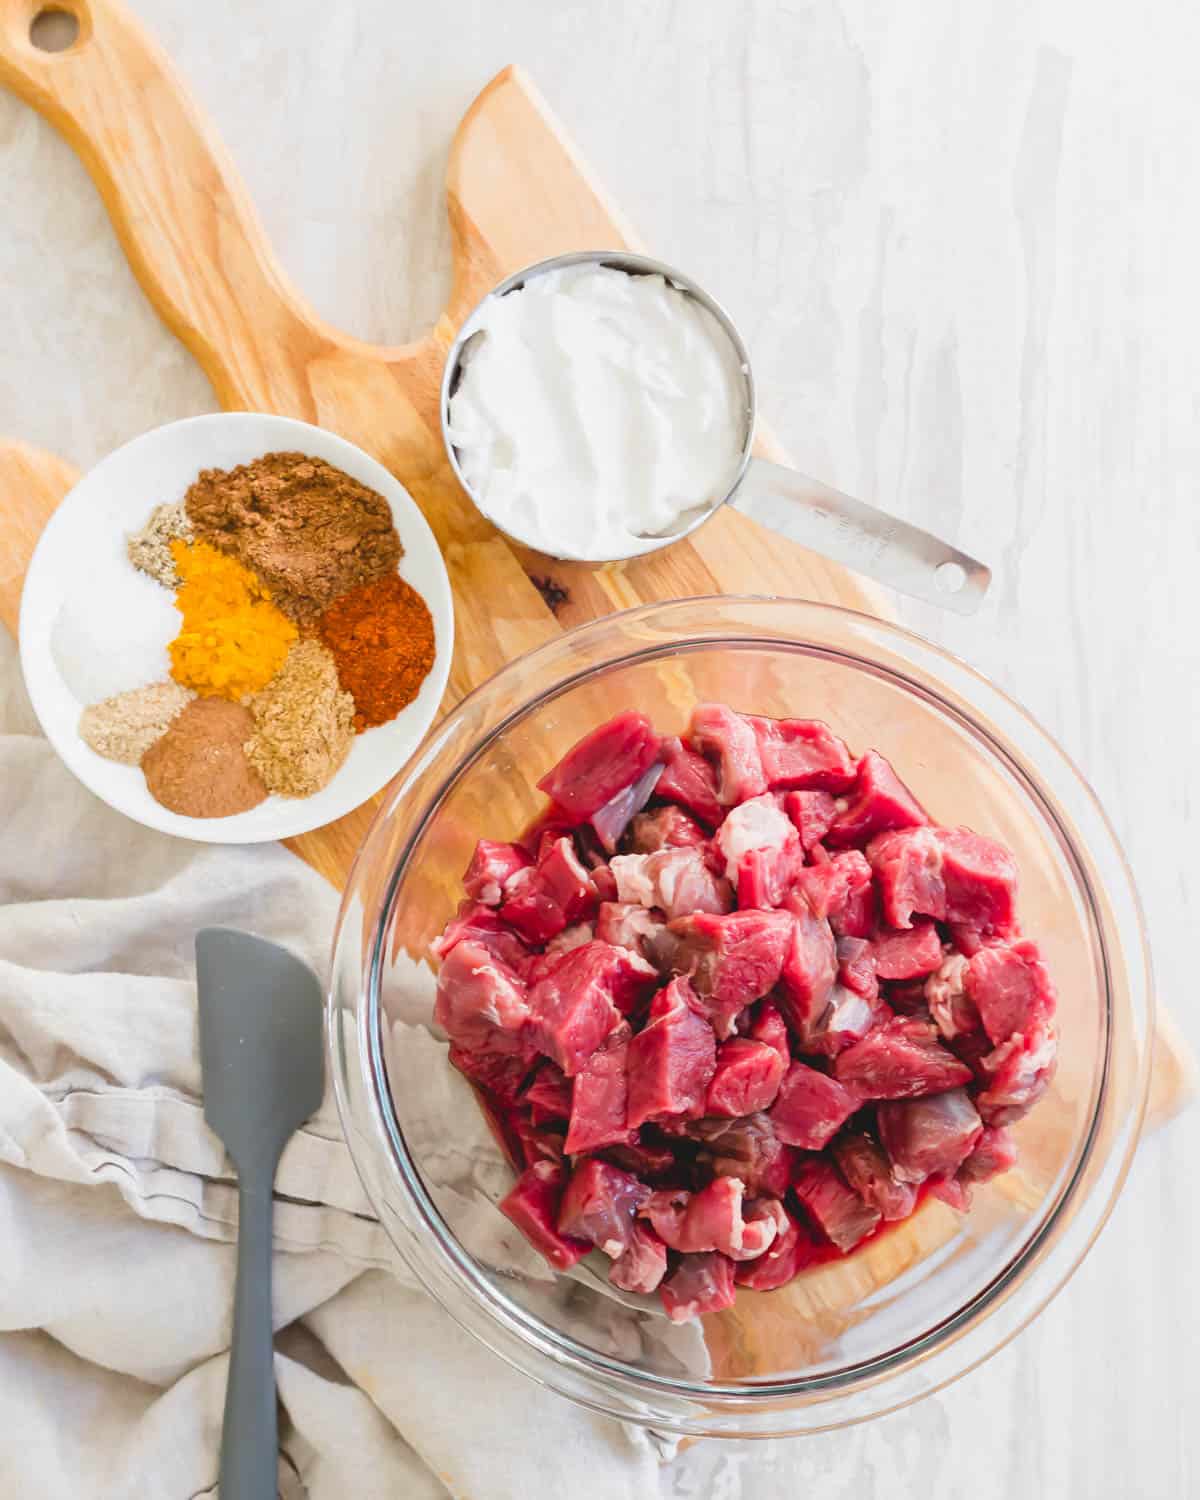 Ingredients to make dairy free lamb korma including boneless leg of lamb cut into pieces, aromatic spices and coconut yogurt.